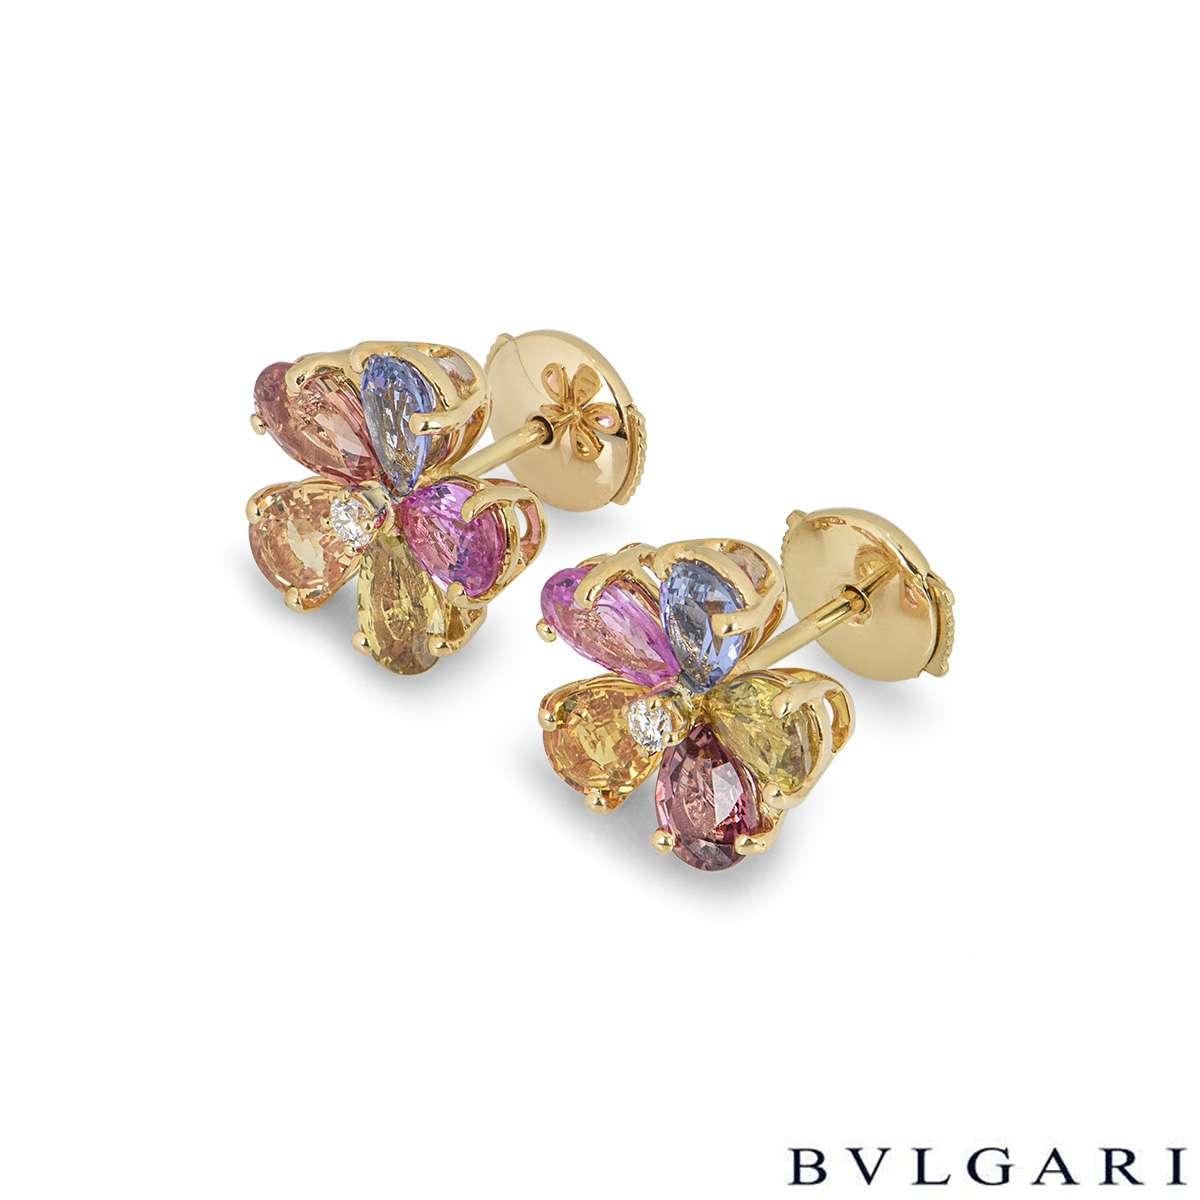 A gorgeous pair of 18k yellow gold flower earrings by Bvlgari. The earrings each feature a single round brilliant cut diamond in the centre surrounded by 5 multi coloured pear shaped sapphires. The diamonds have a total weight of approximately